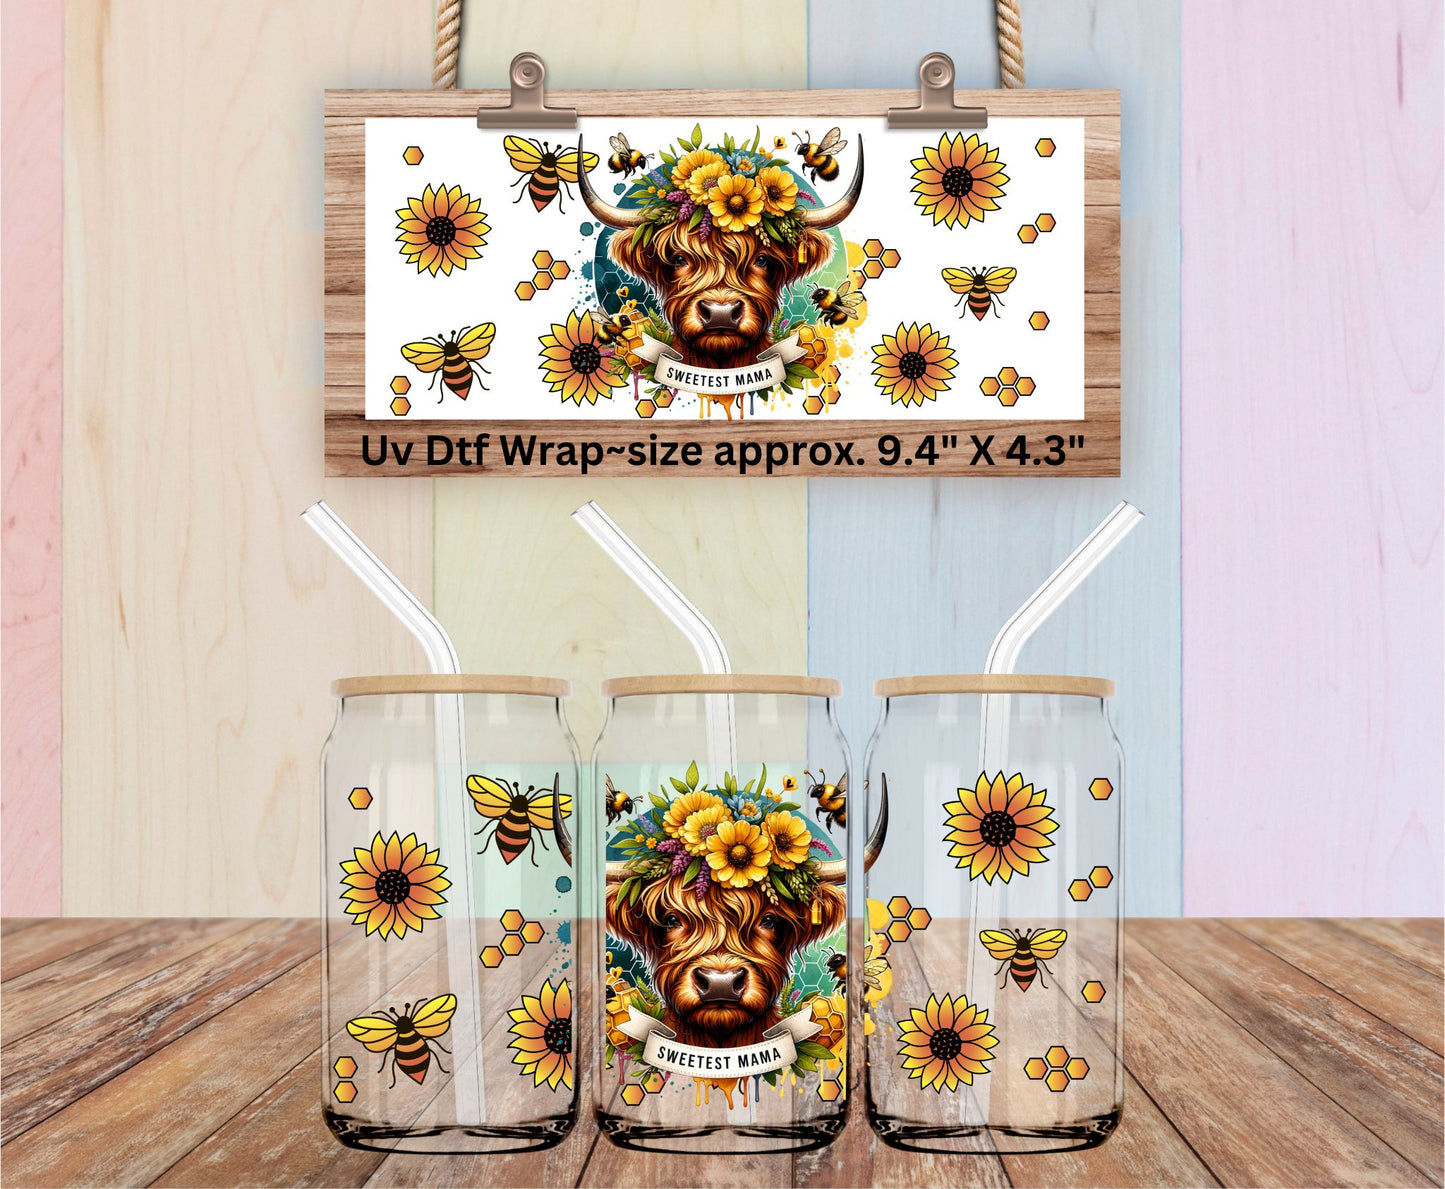 Uv Dtf Wrap Sweetest Mama Highland Cow Sunflowers & Bees